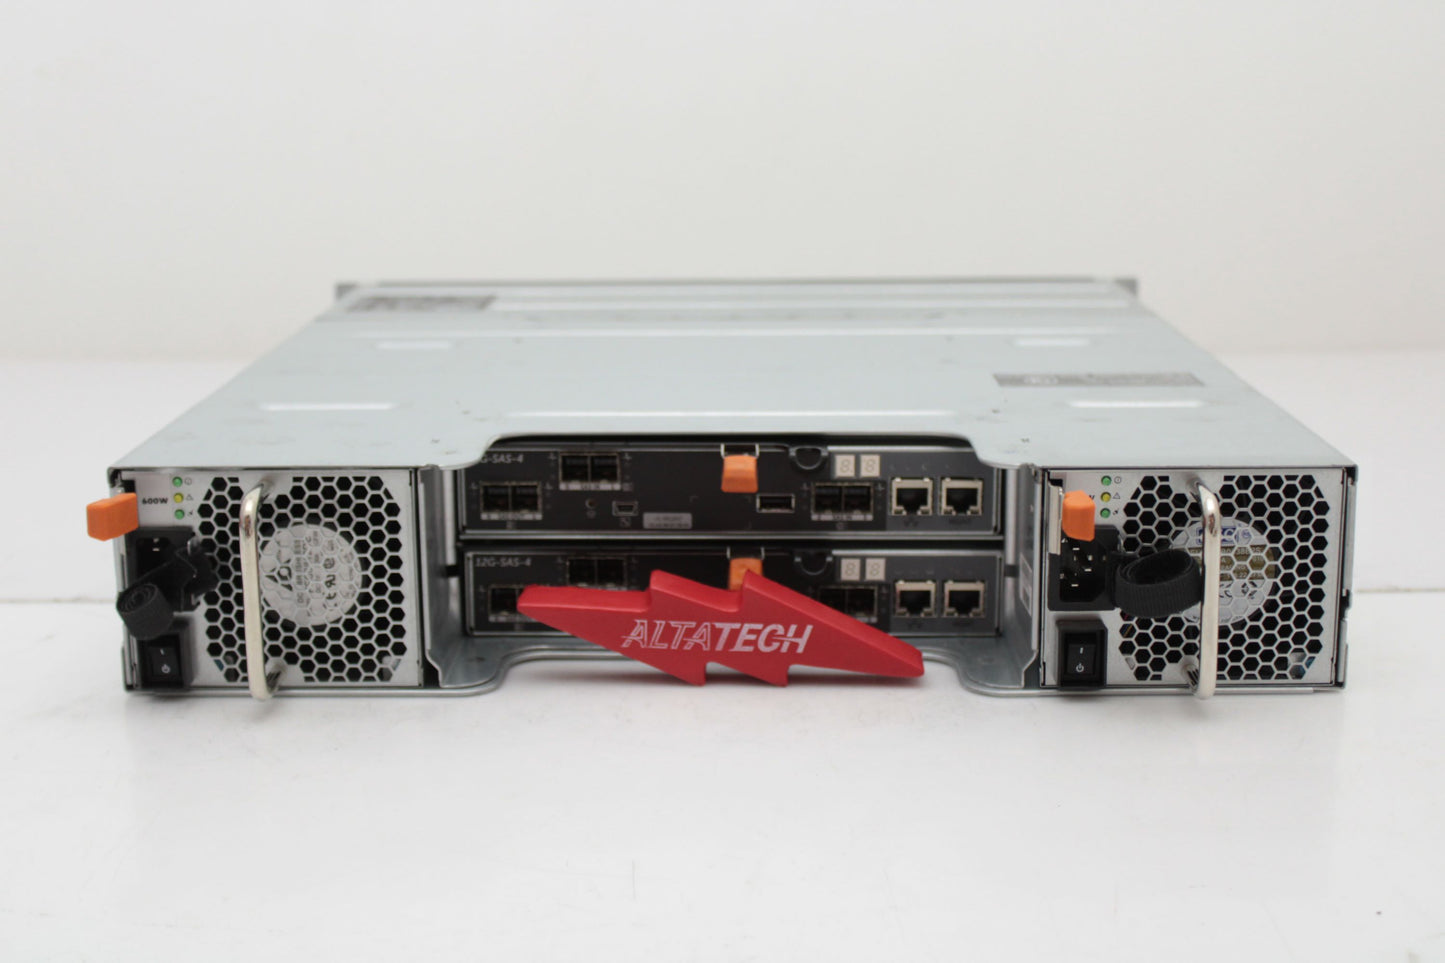 Dell MD3420_24xVCWFG PowerVault MD3420 24X2.5' 12G, Used